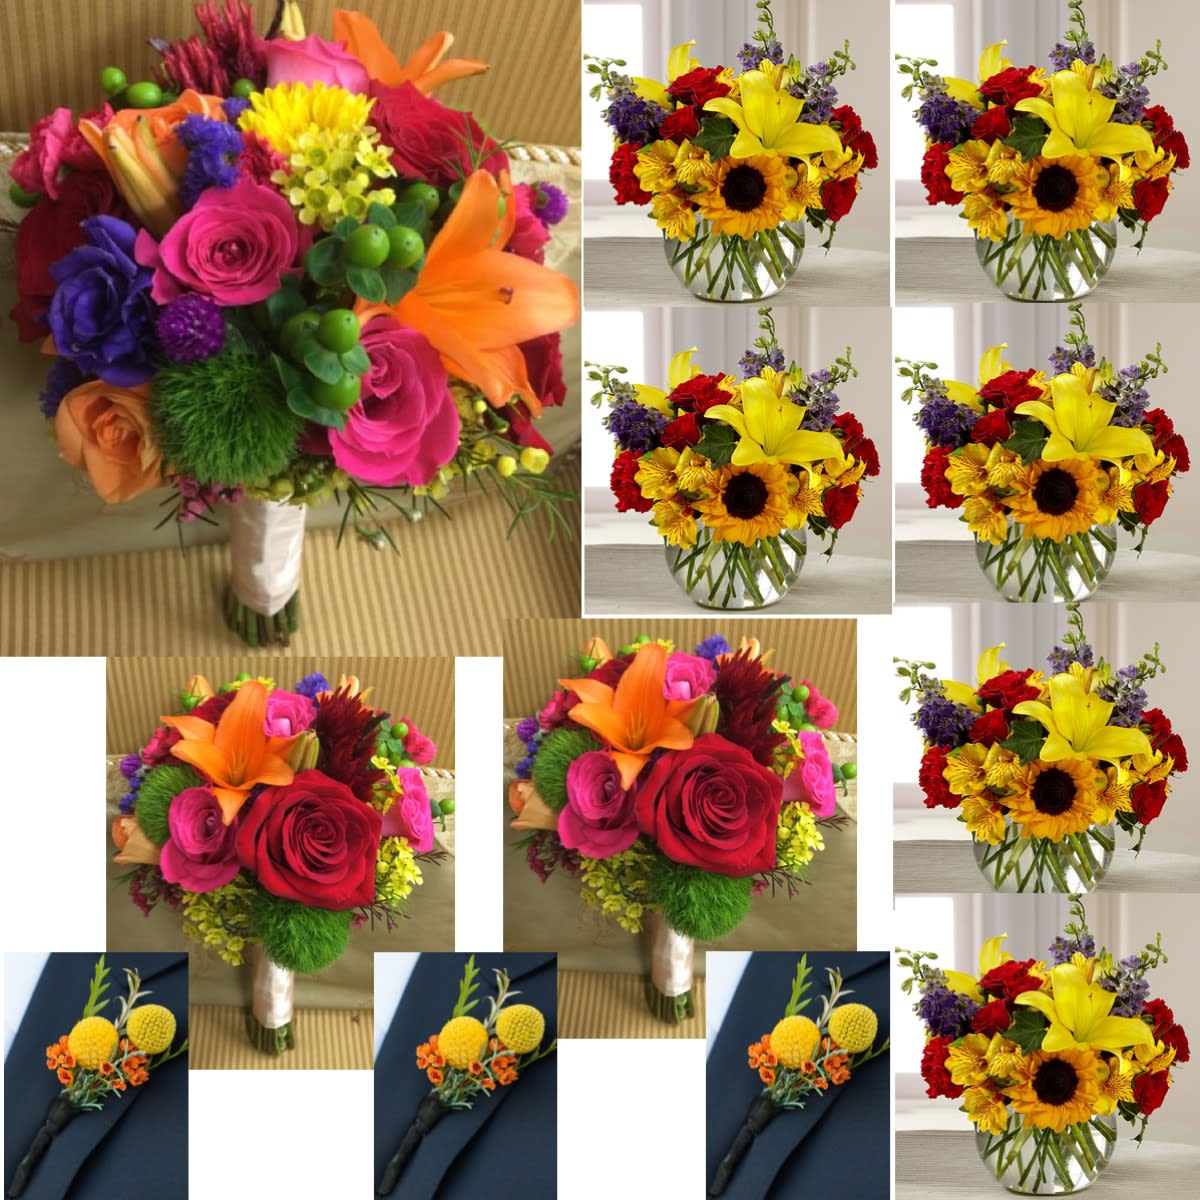 Colorful Wedding Collection - Flowers for this package: Hot Pink Roses, Red Roses, Orange Lilies, Sunflowers, Purple Lisianthus, Green Dianthus, Purple Statice.  Package (A) - Price $385.00 1 Bridal Bouquet 2 Bridesmaids 3 Boutonnieres 2 Pin Corsages   Package (B) - Price $795.00 1 Bridal Bouquet 1 Maid of Honor 2 Bridesmaids 4 Boutonnieres 2 Pin Corsages  1 Box Rose Petals 6 Centerpieces  (OPTIONAL) ADDITIONAL ITEMS PRICE LIST:  Bridesmaid $60.00 each Pin Corsage $20.00 each Boutonniere $12.00 each  Centerpiece $55.00  Please call our flower shop to add more flowers on this package 702-873-8731